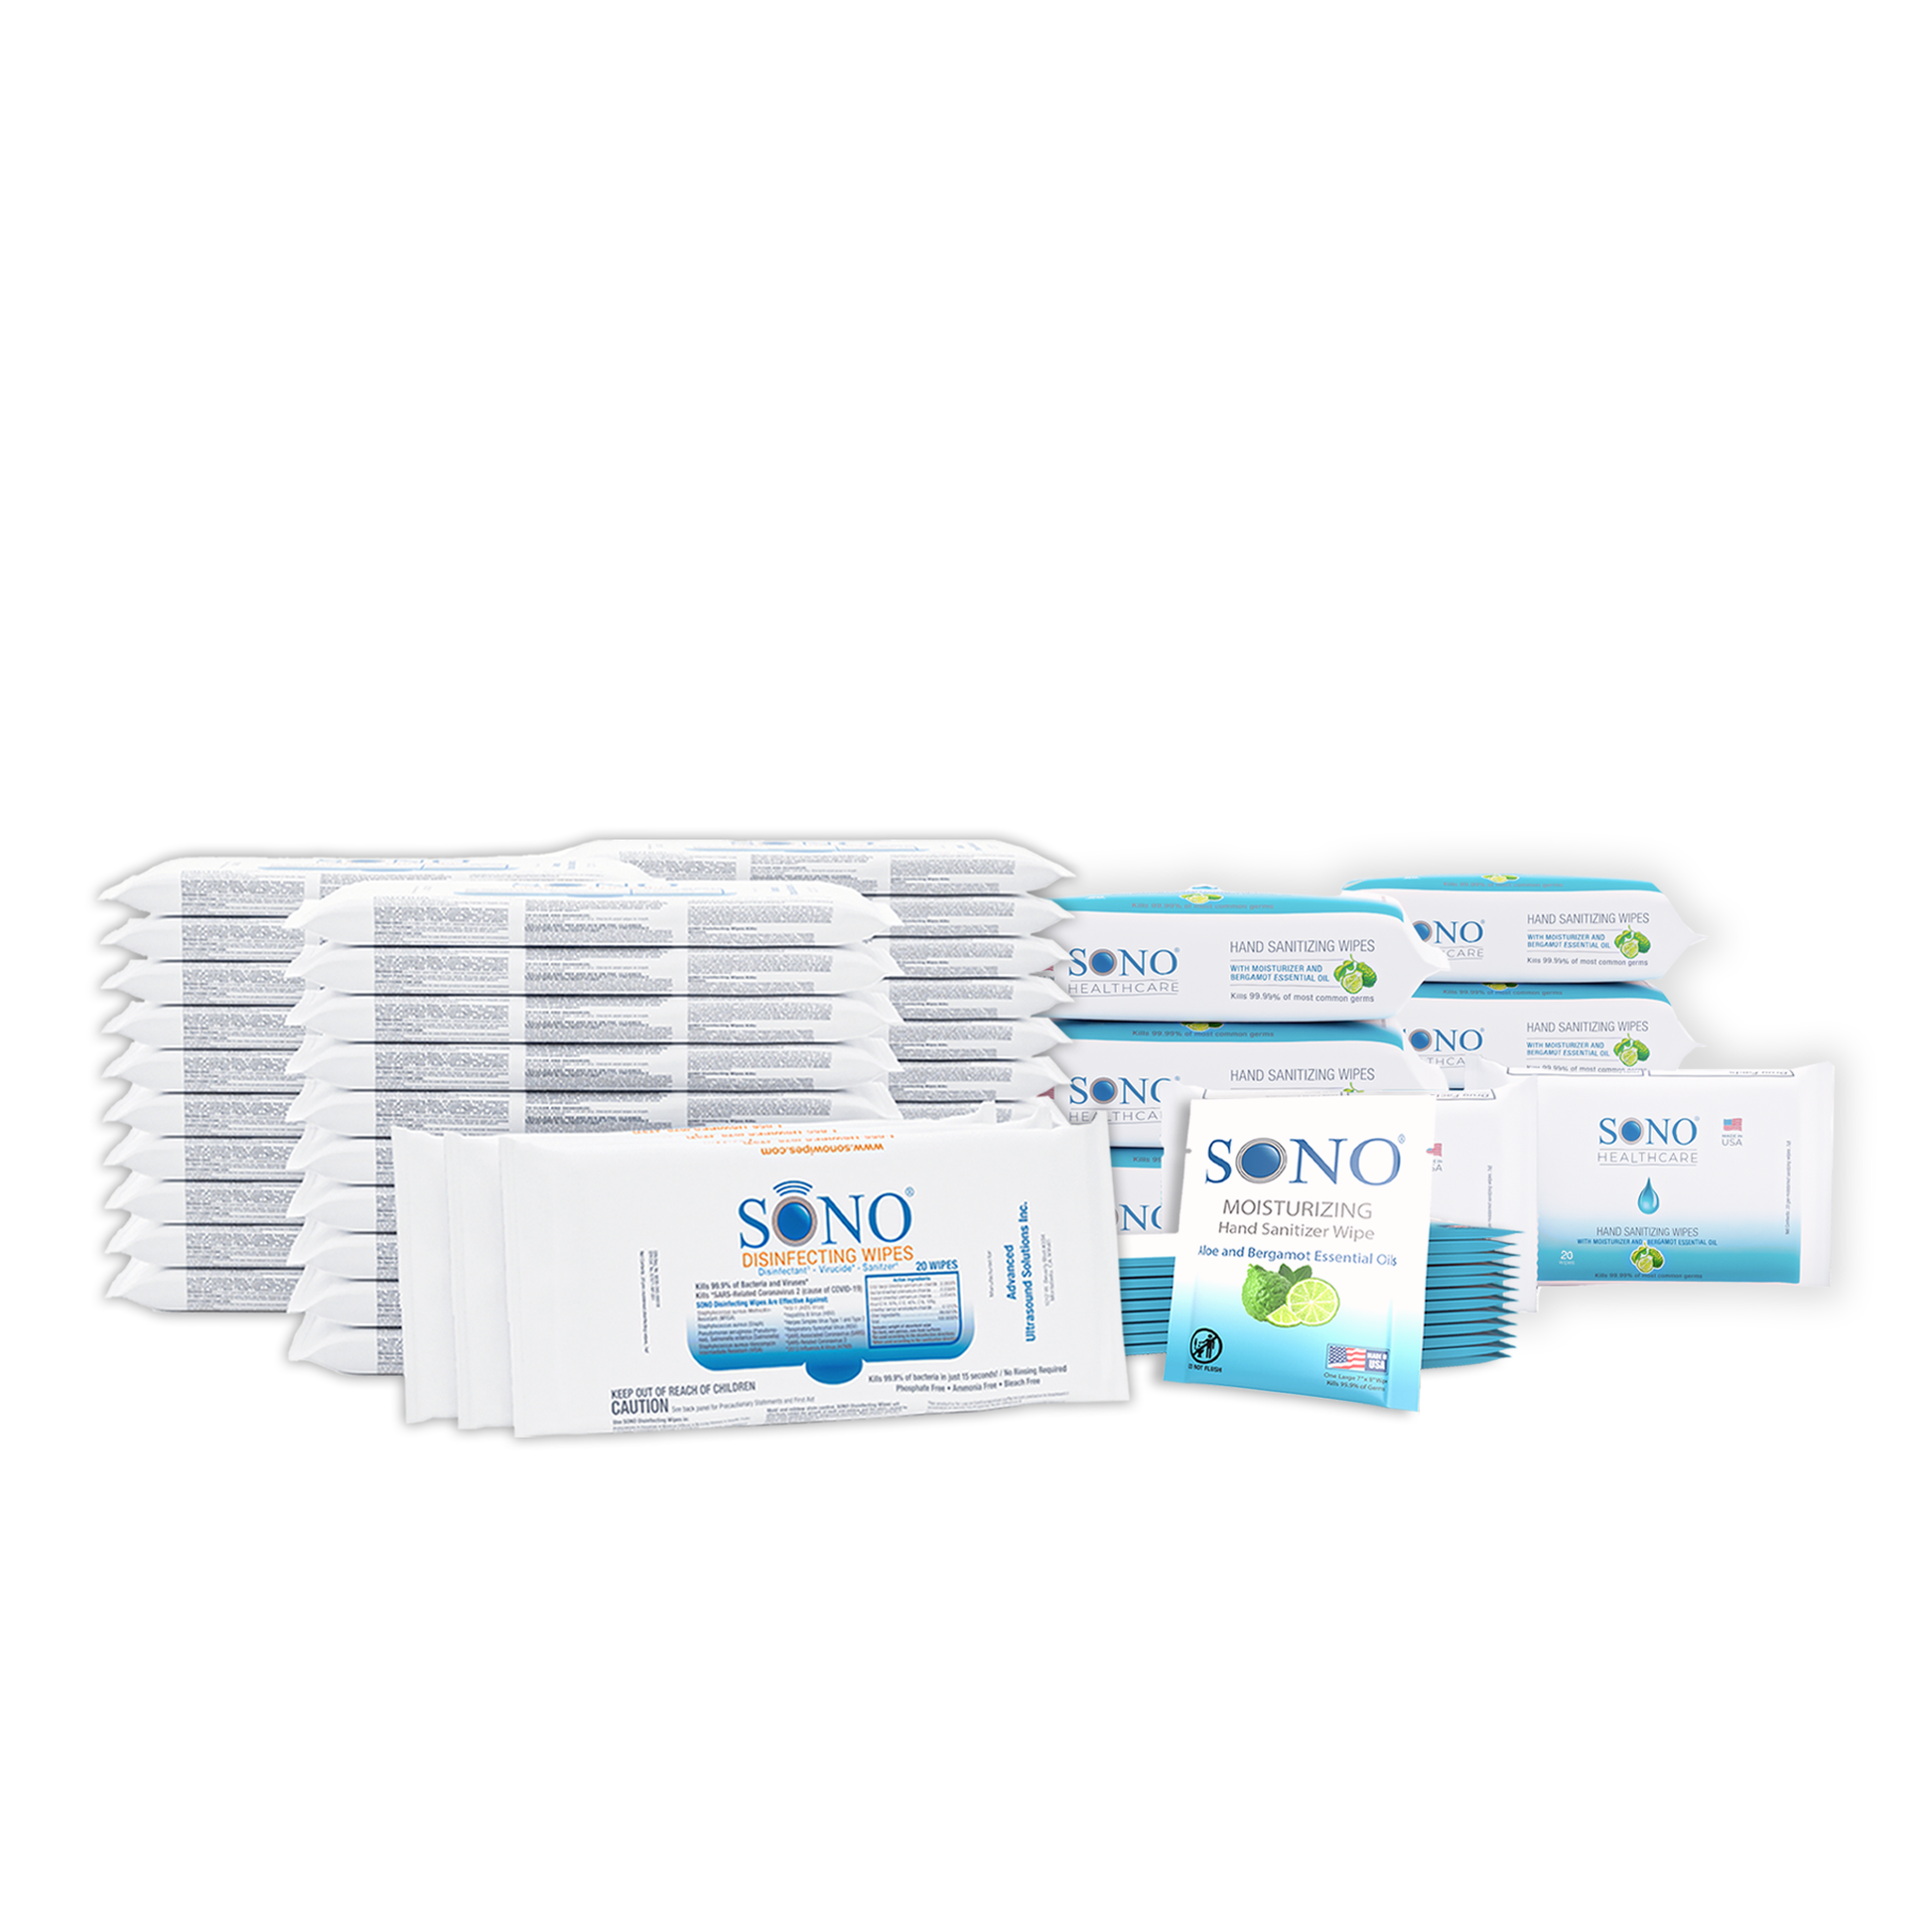 Disinfecting Wipes Bulk - SONO wipes: Travel Bundle Offer